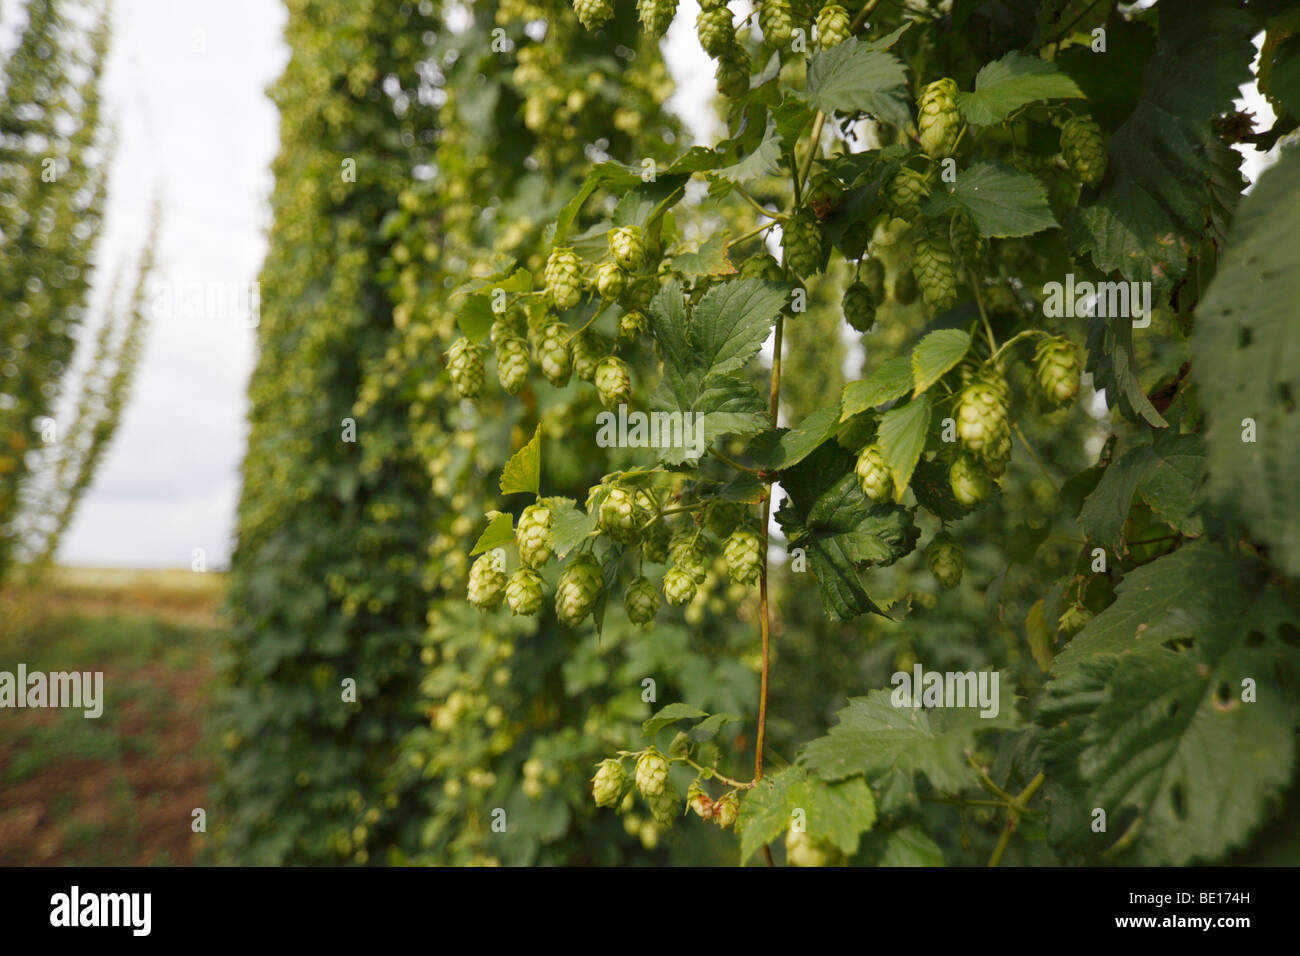 A Hop yard in Eckental, Bavaria, Germany. The hop plants are trained up wires. Stock Photo